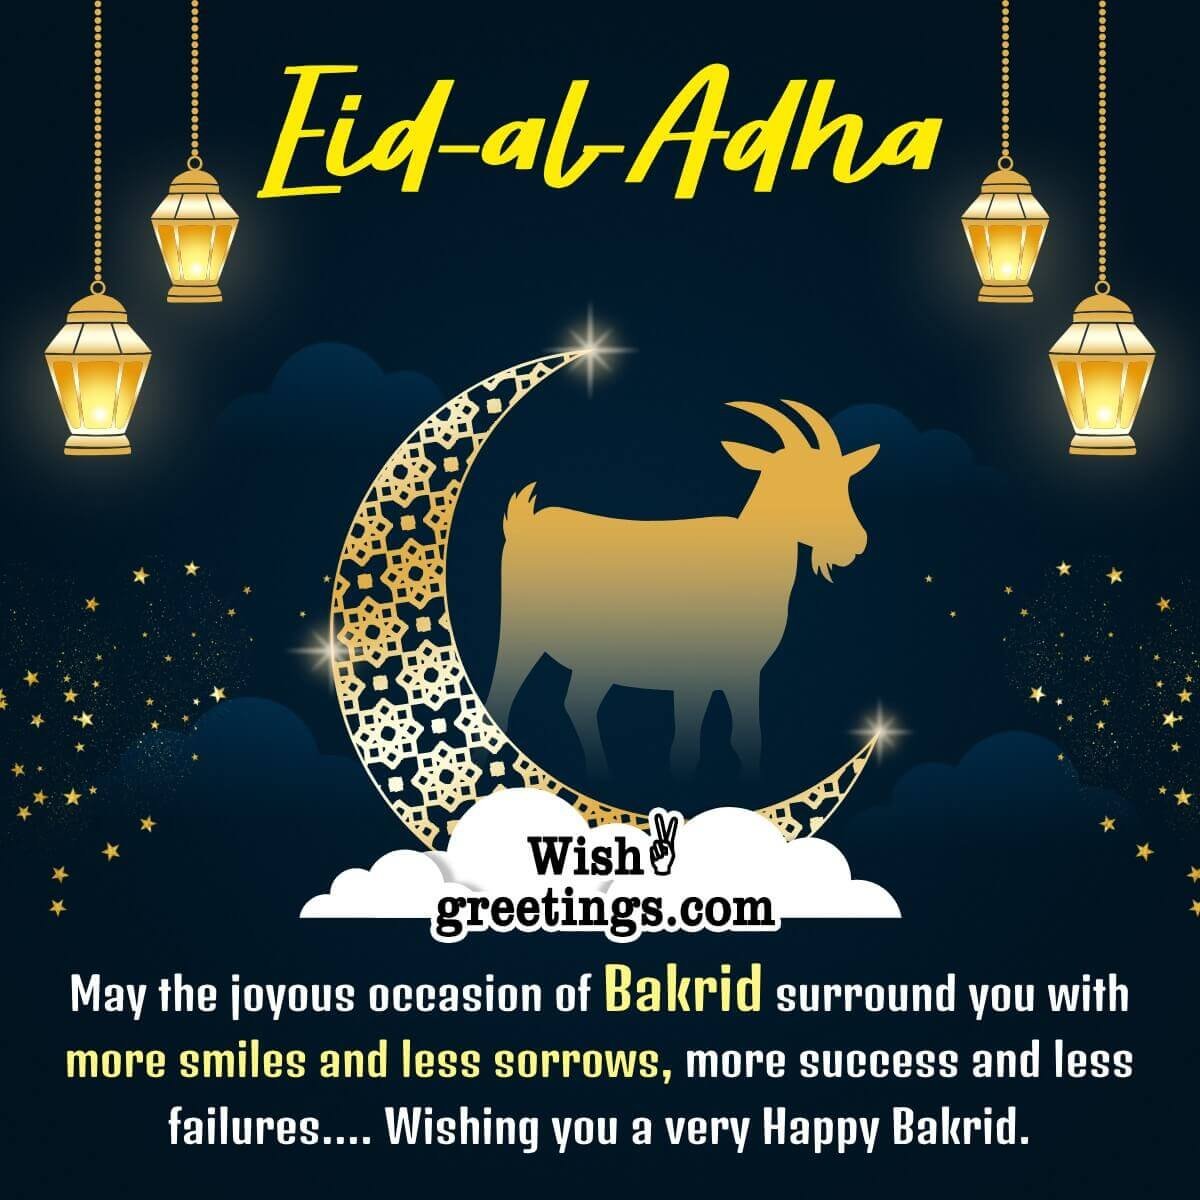 Eid-al-Adha Wishes Messages